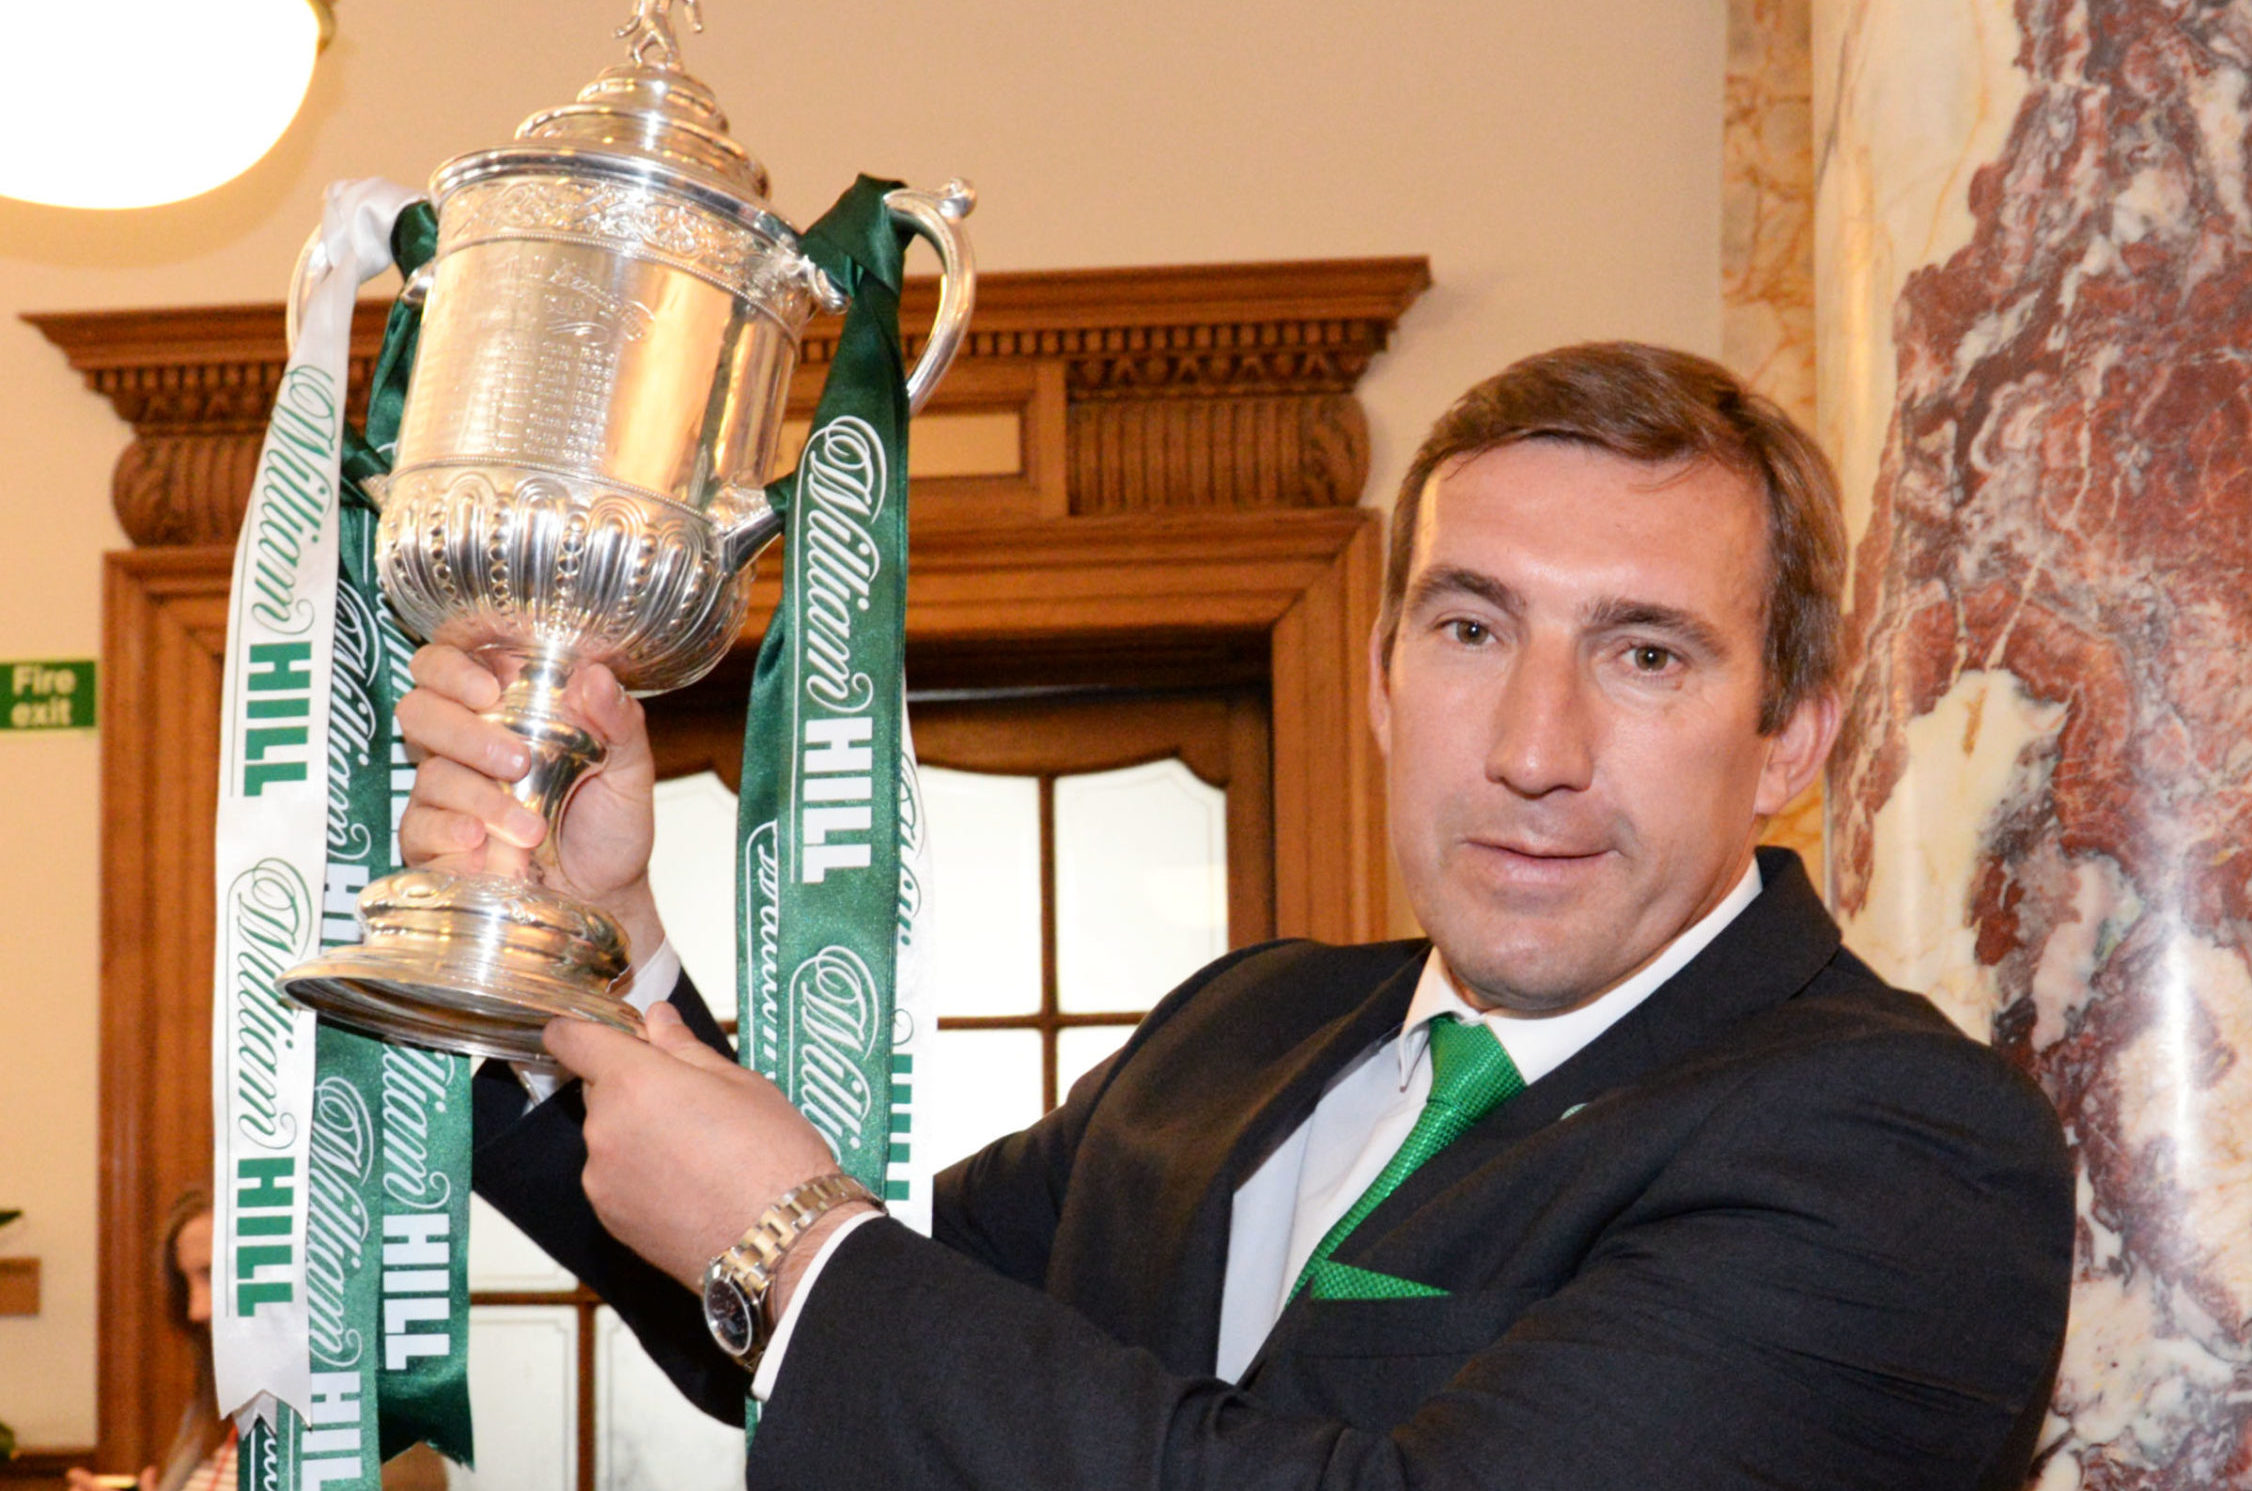 Alan Stubbs was the last non-Celtic manager to lift a trophy when he led Hibs to Scottish Cup success in 2016